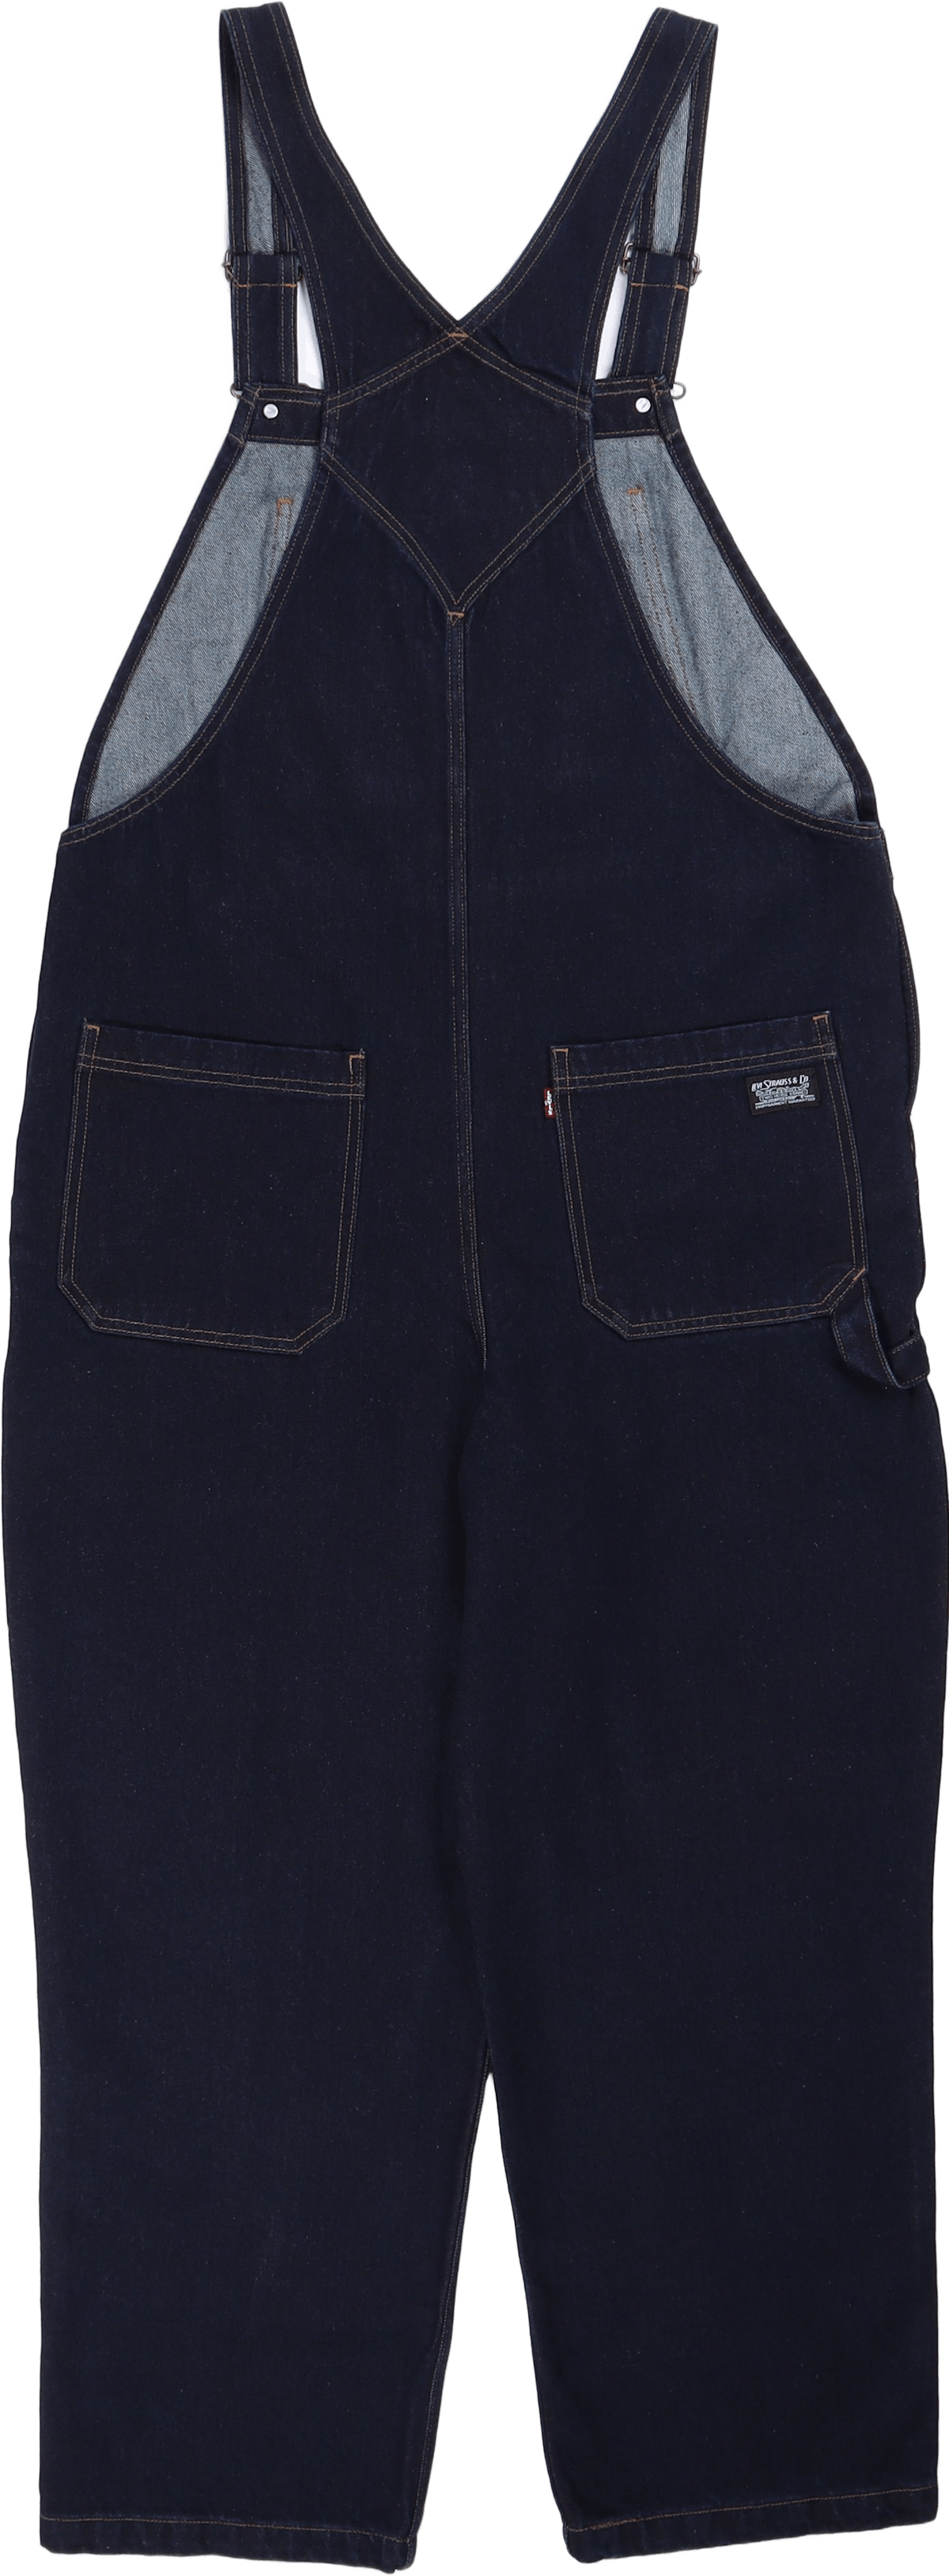 Skate Overall Rinse